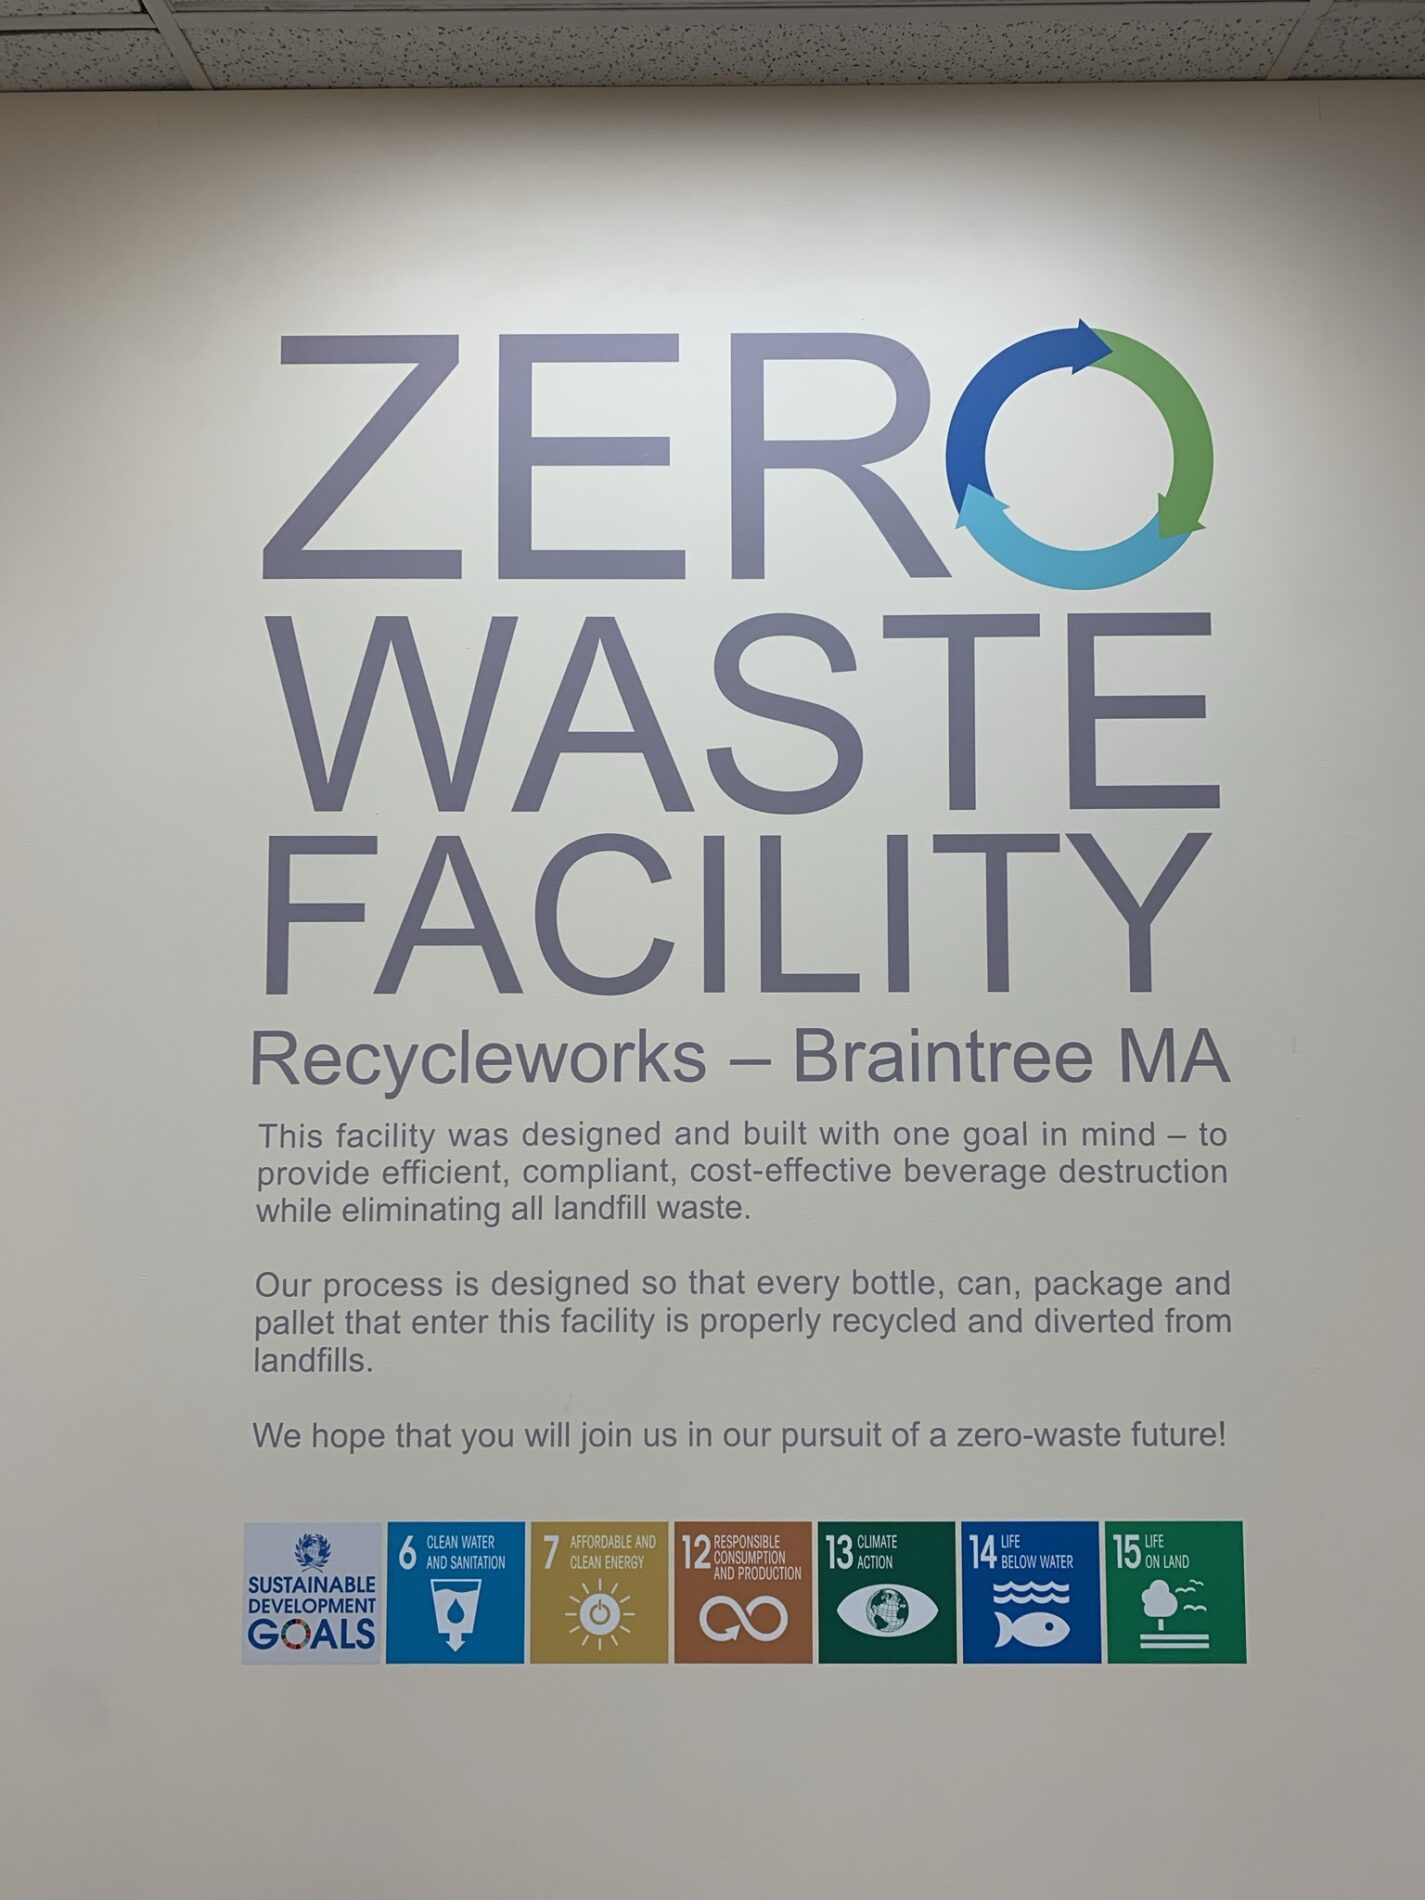 Recycleworks is dedicated to eliminating waste from the landfill!